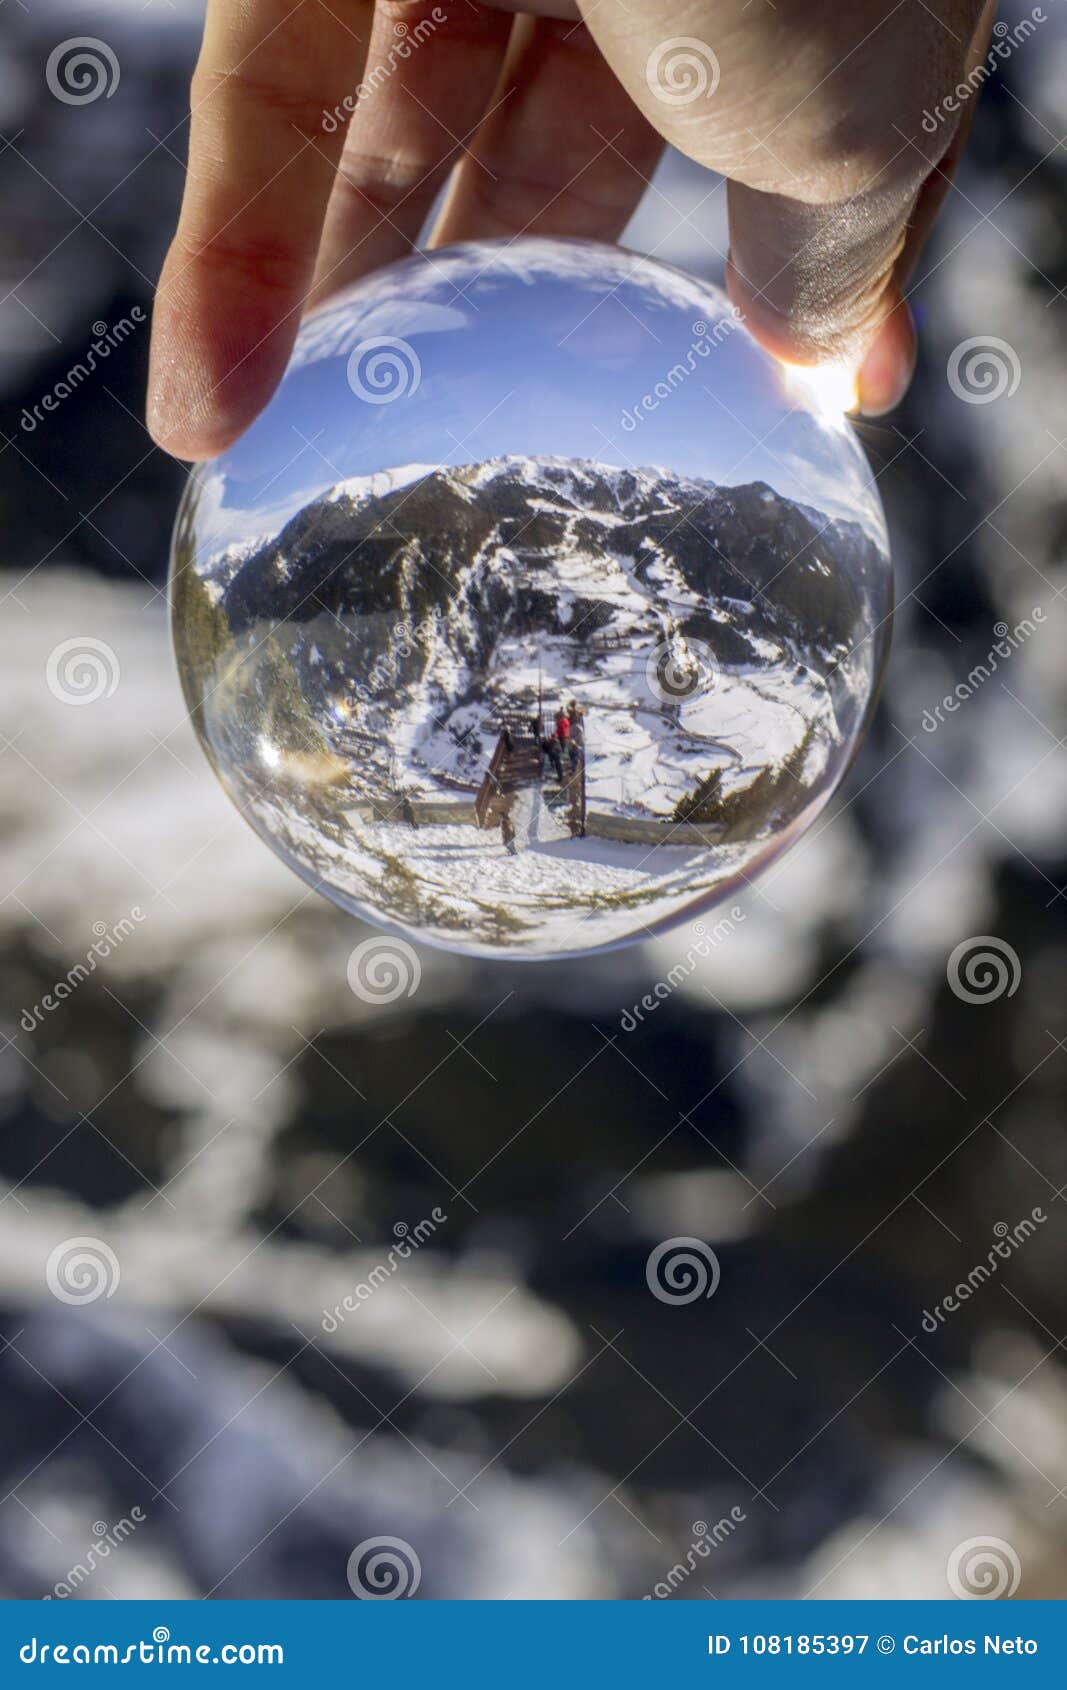 roc del quer trekking trail observation deck, reflection view through crystal ball. andorra.